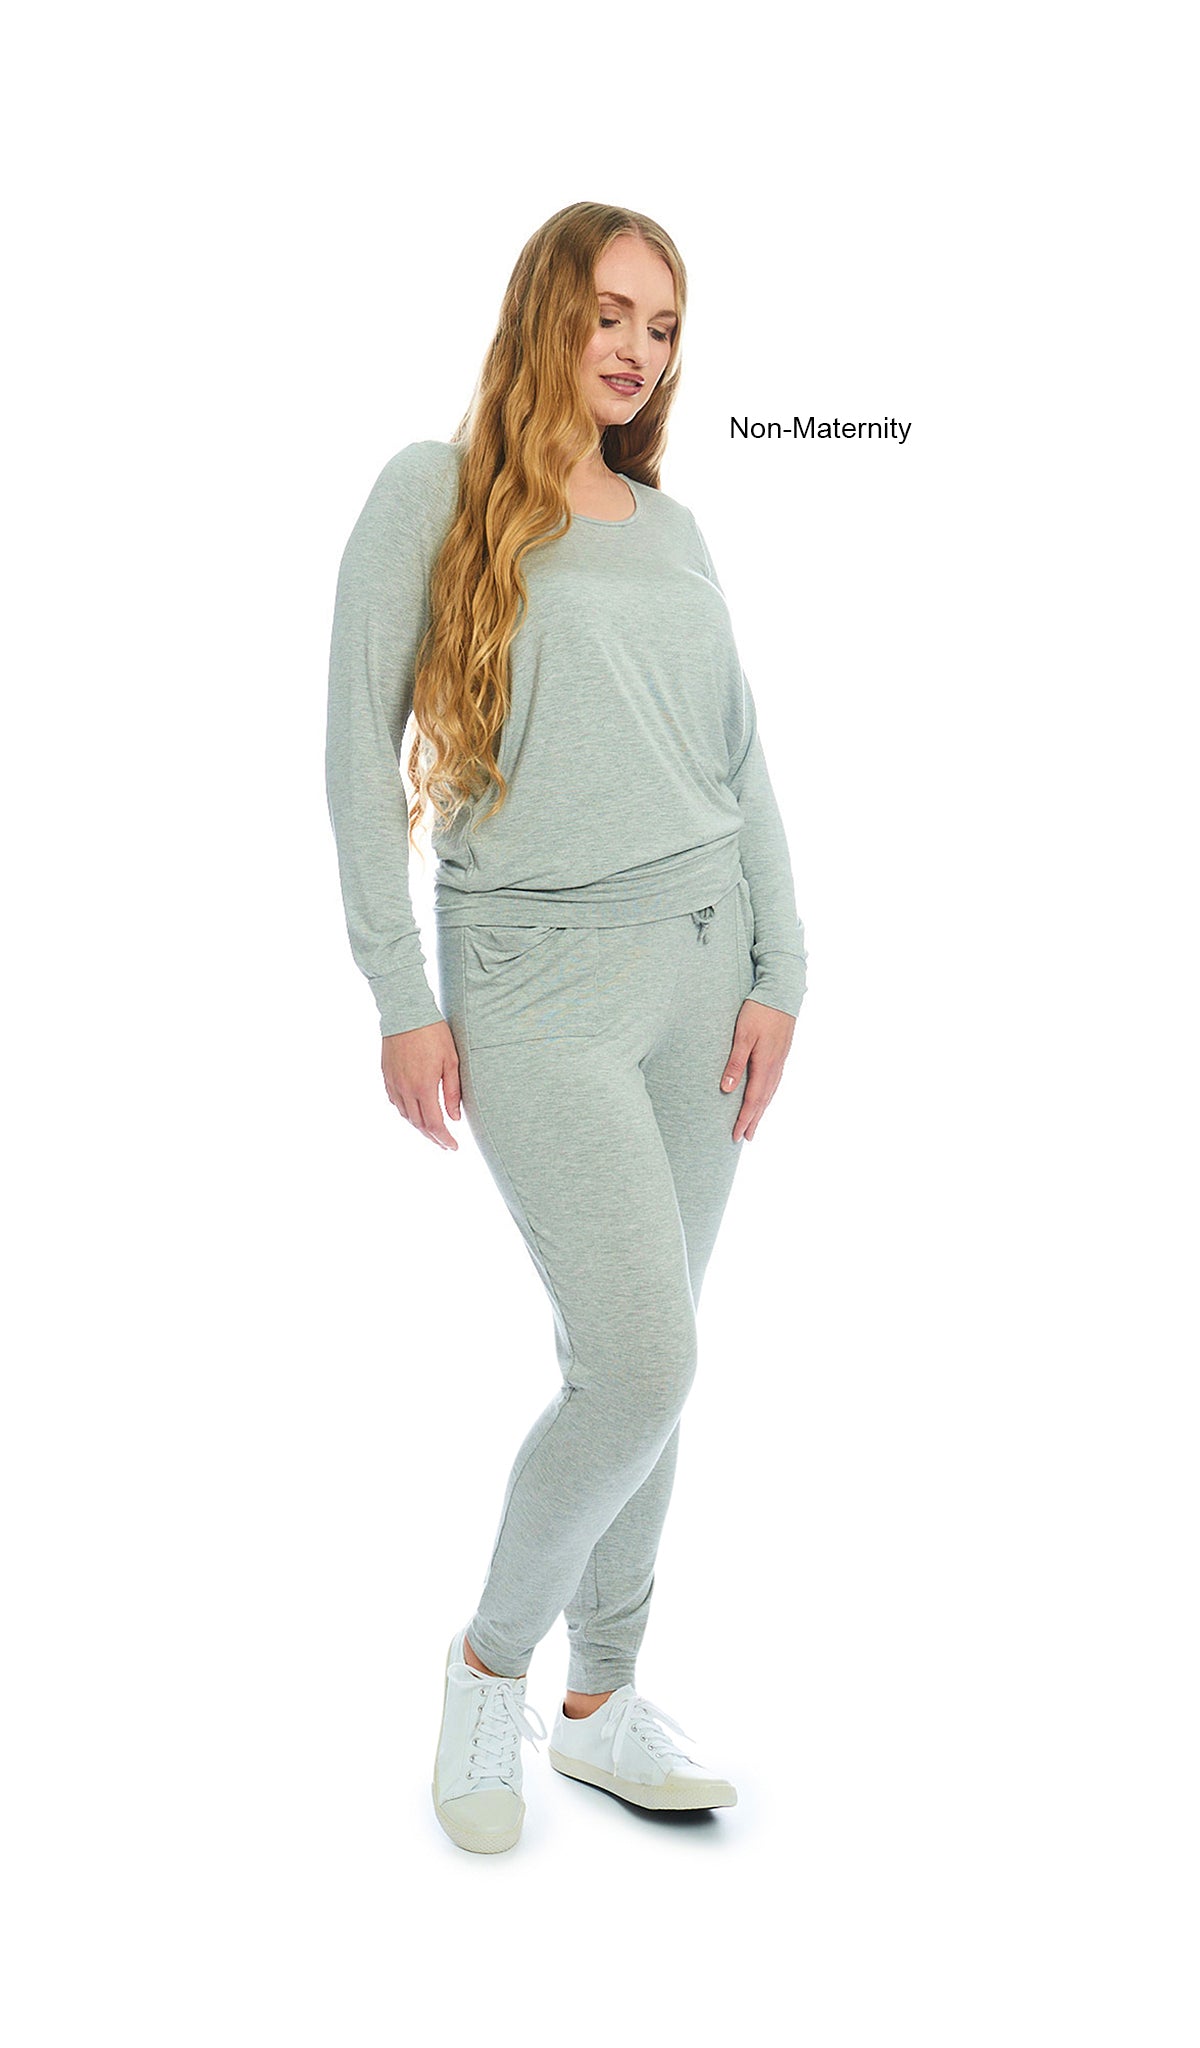 Heather Grey Solid Whitney 2-Piece on woman wearing as non-maternity. Long sleeve top with nursing access on sides and long pant with cuff.